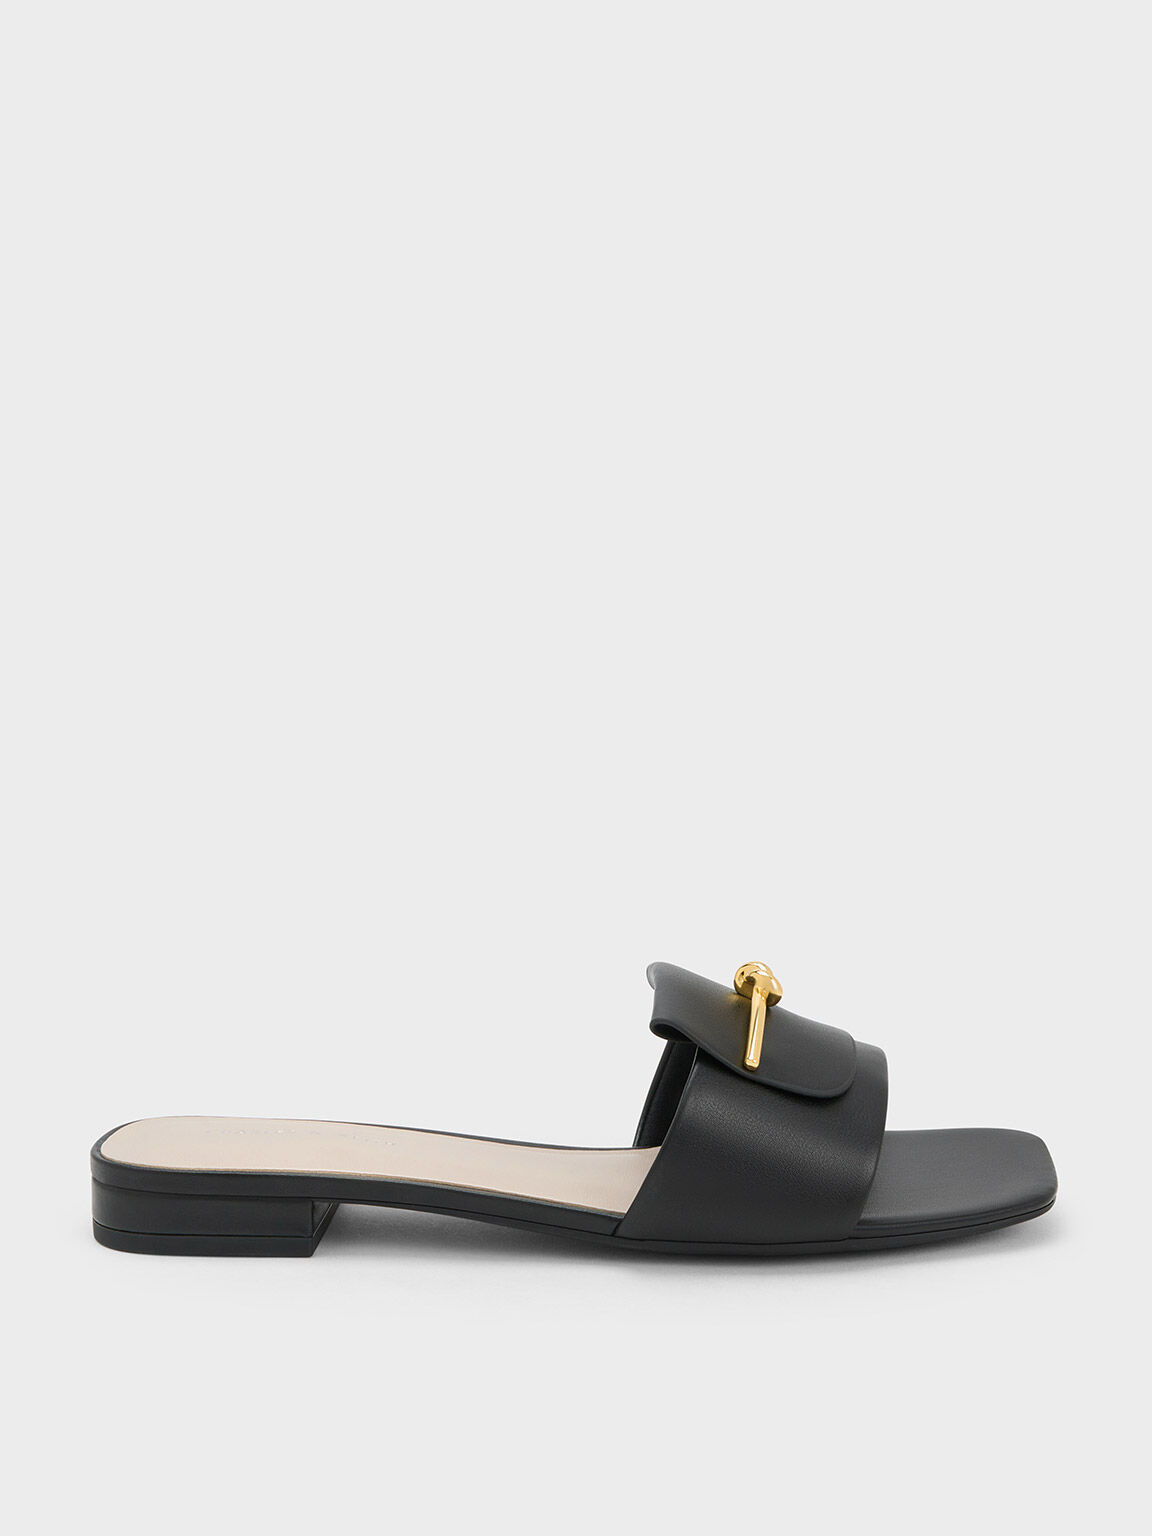 Women's Sandals | Shop Exclusive Styles | CHARLES & KEITH CA